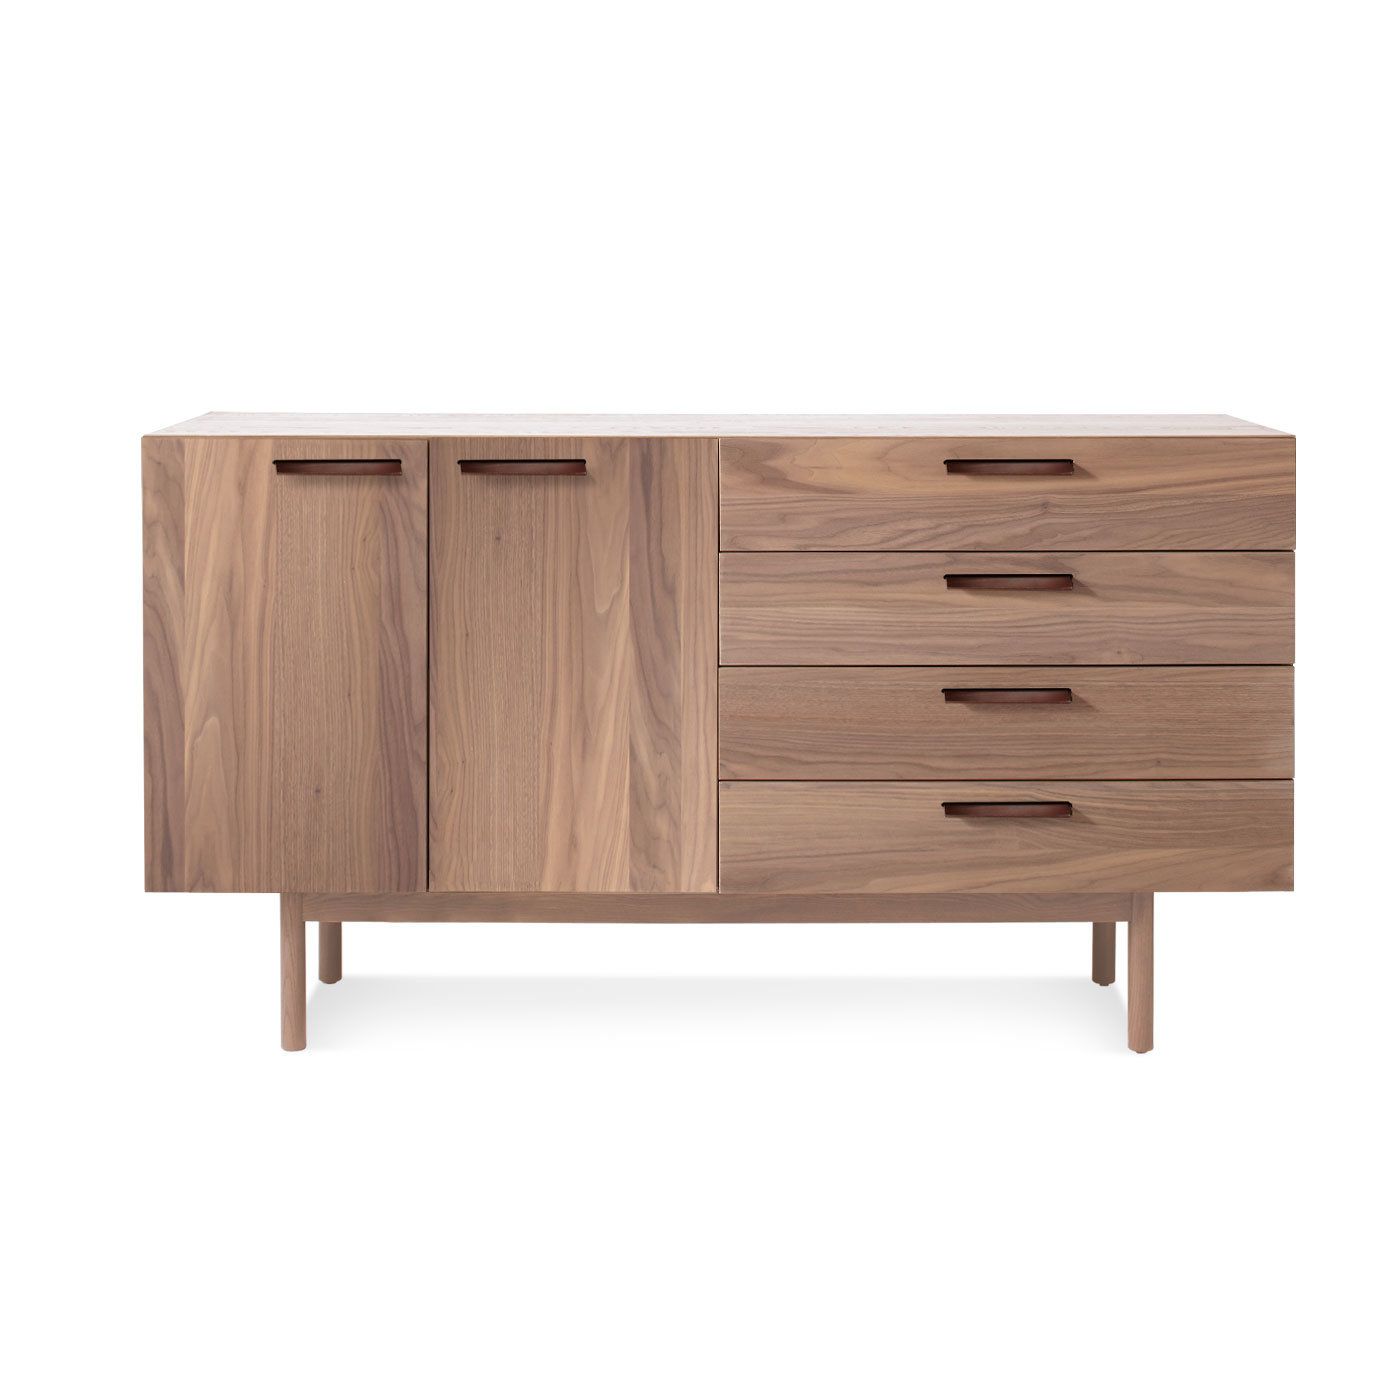 Shale 3 Drawer 2 Door Sideboard & Reviews (View 9 of 20)